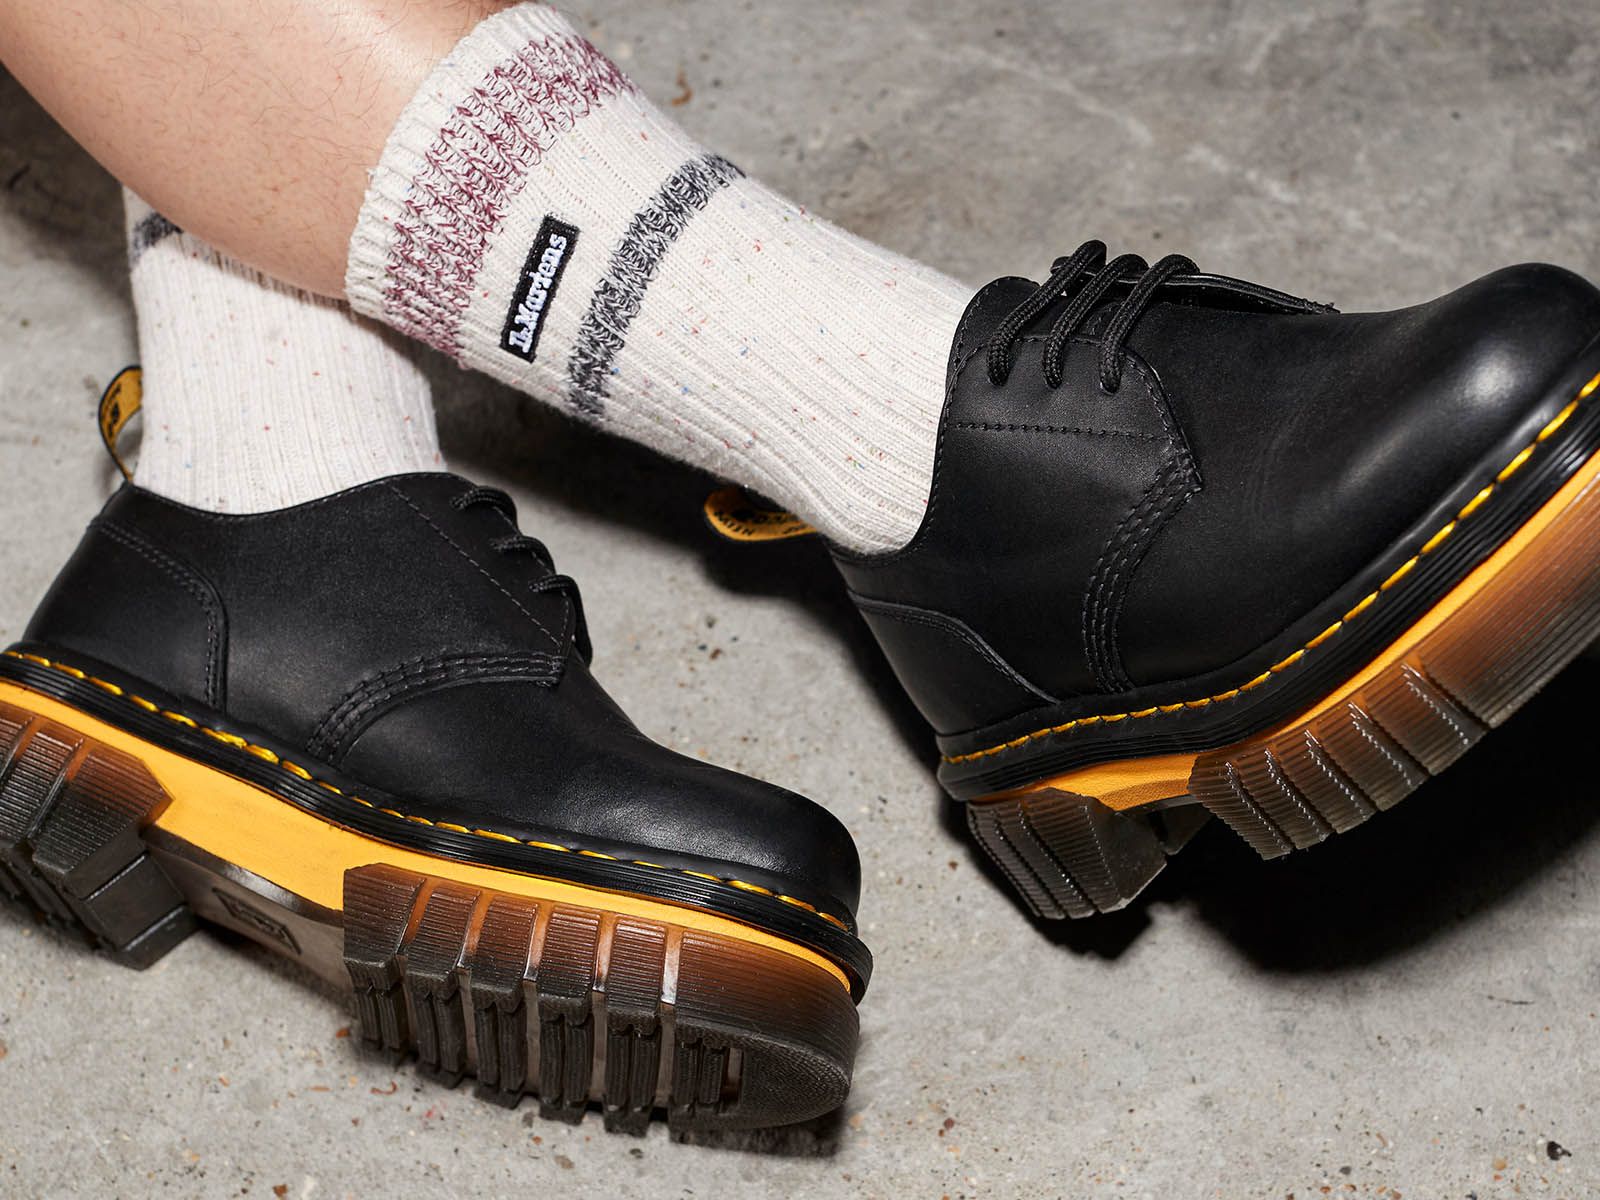 Dr. Martens introduces the Neoteric Yellow Pop Collection